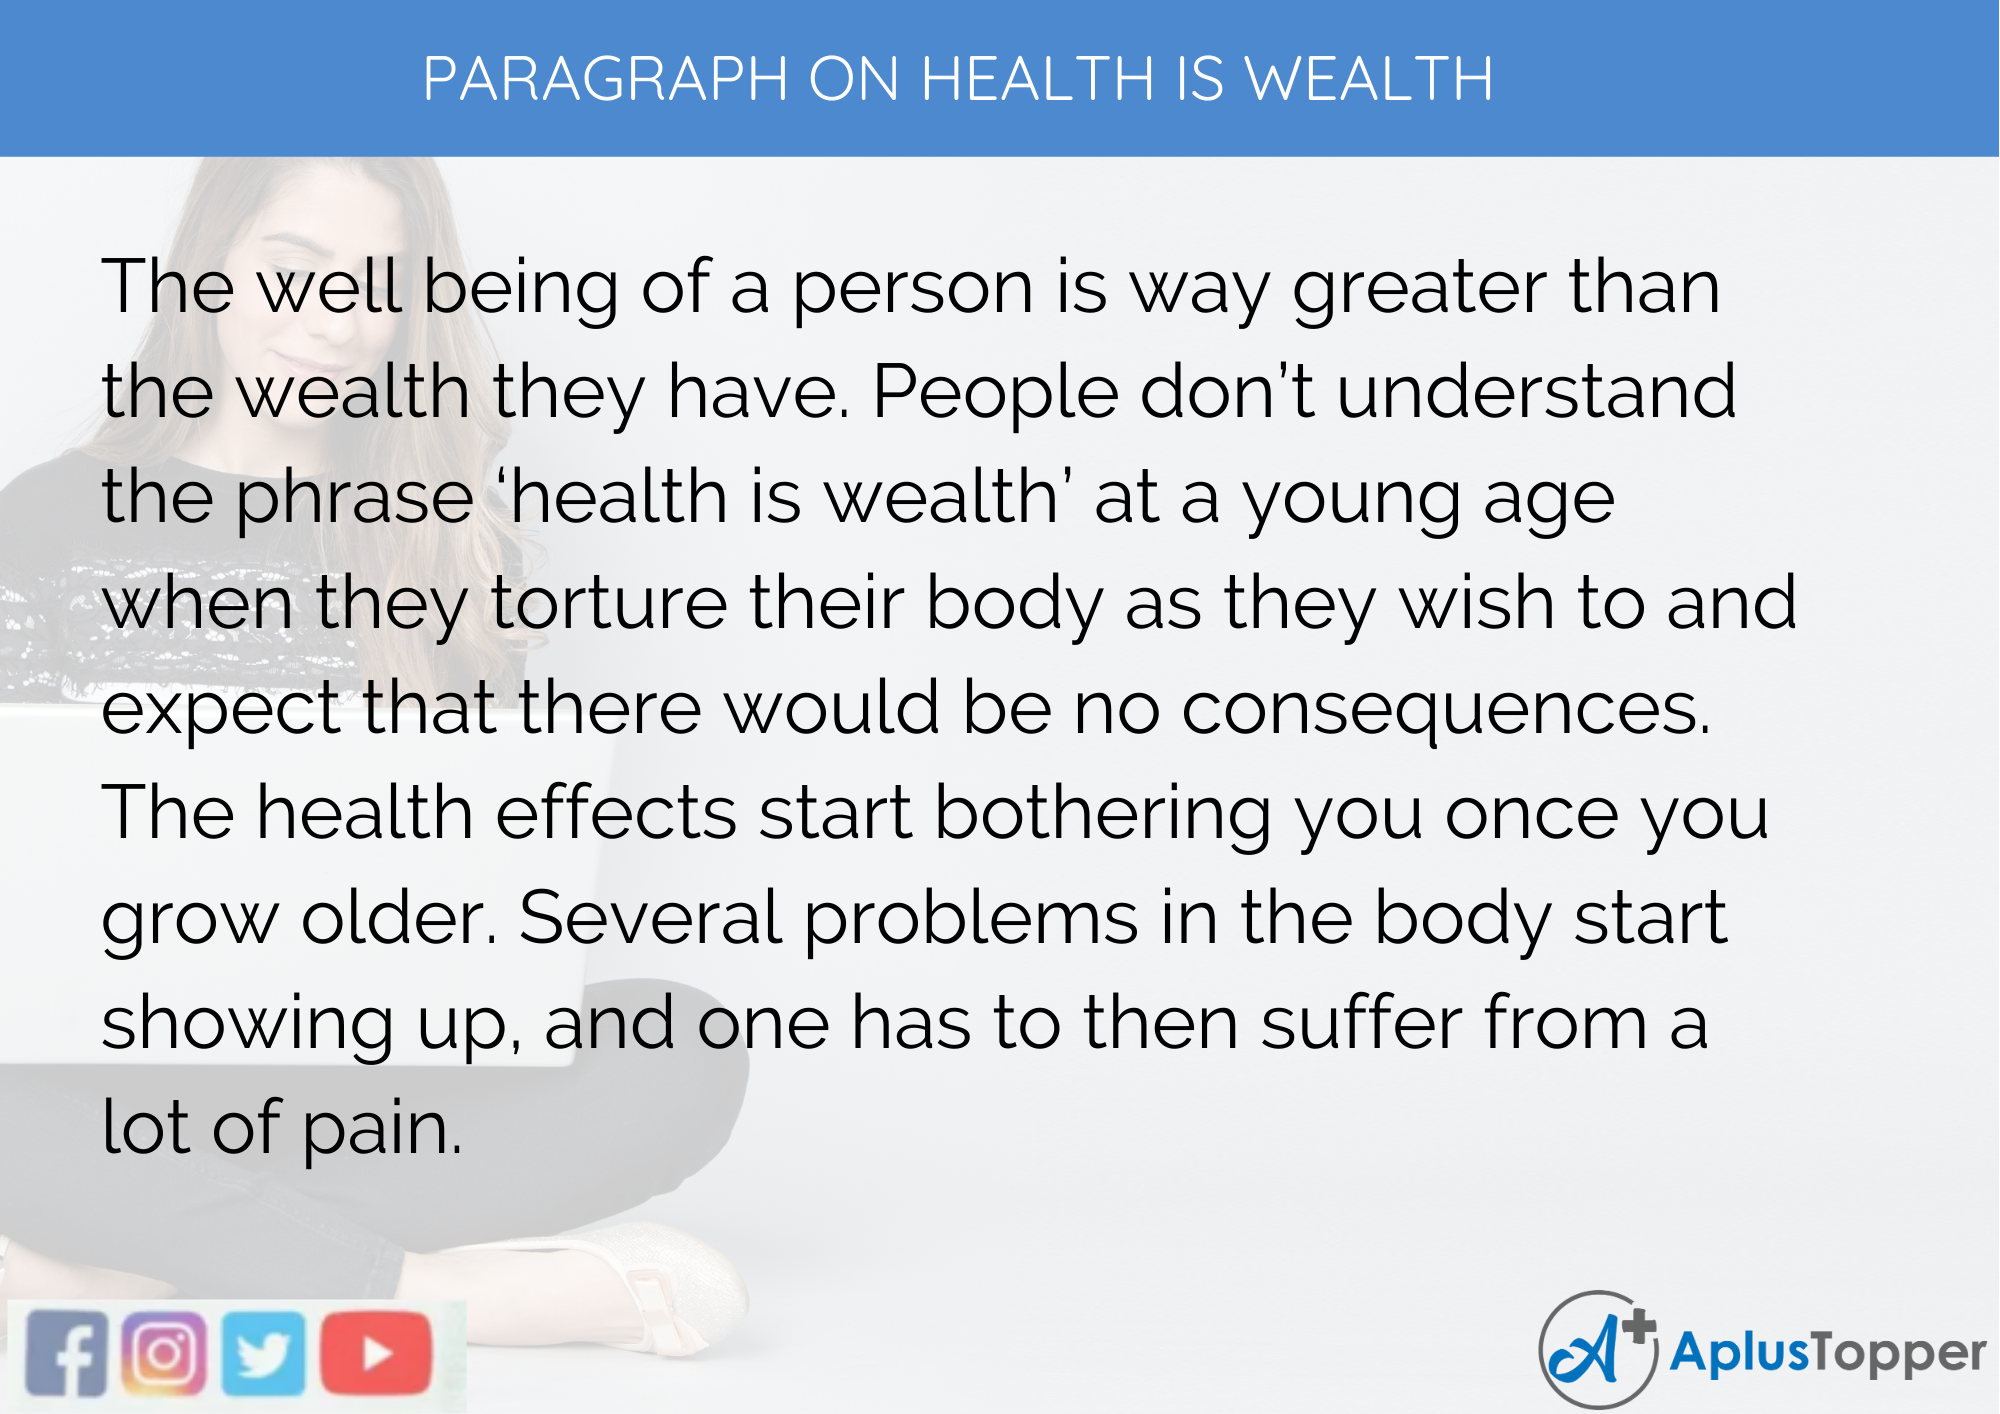 one paragraph essay about health is wealth